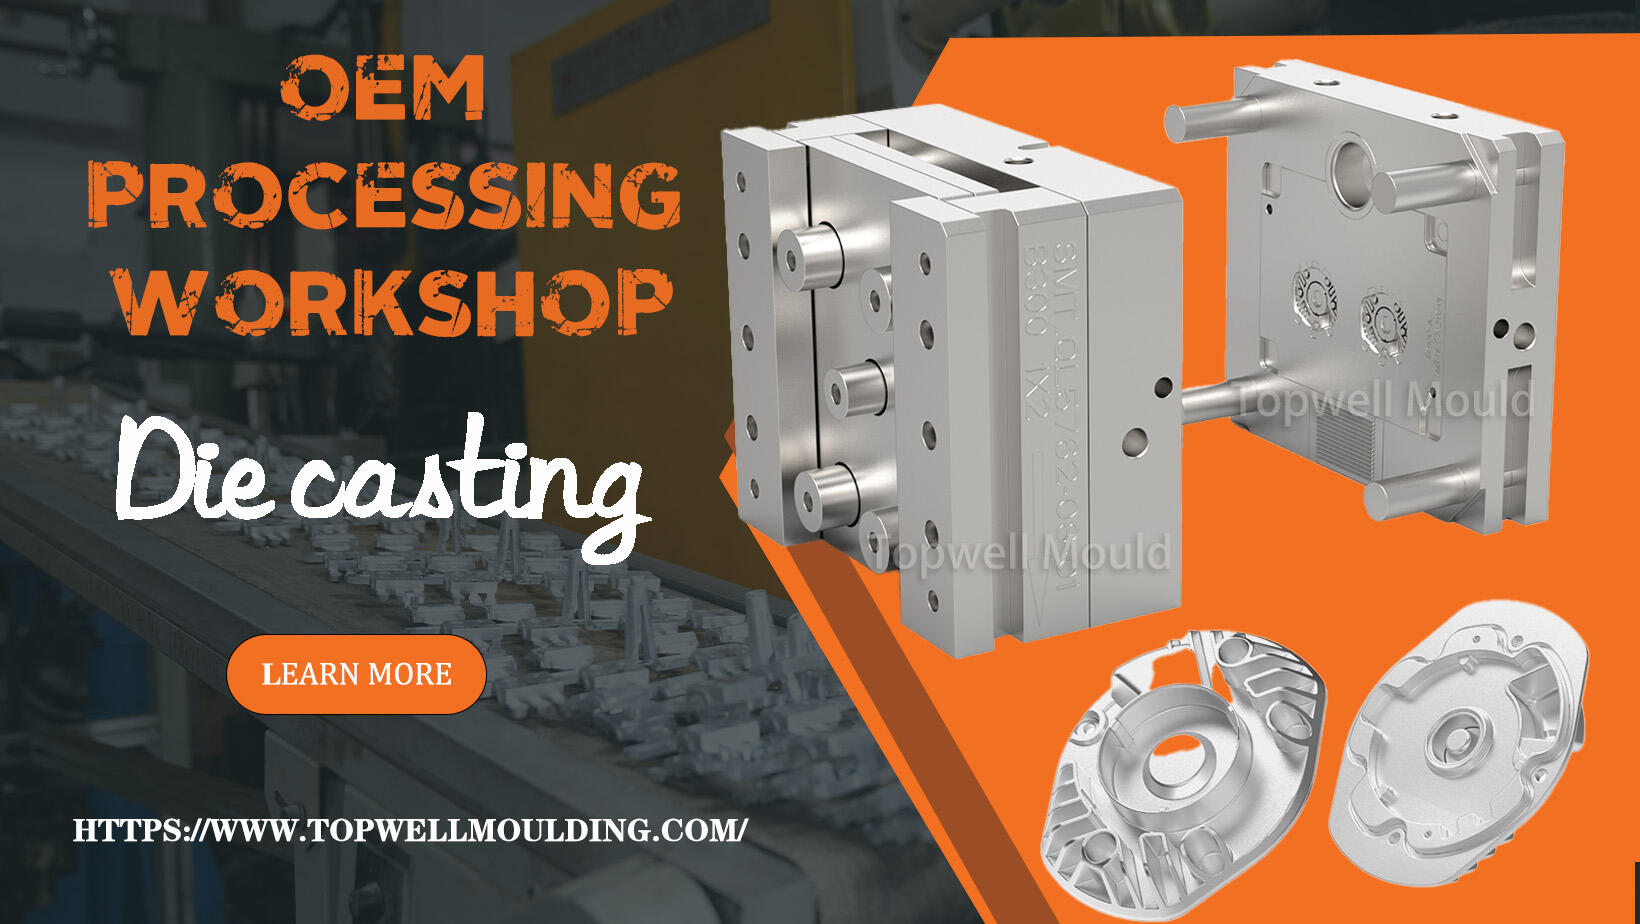 The die casting process is widely used in manufacturing#die casting#die-casting technique